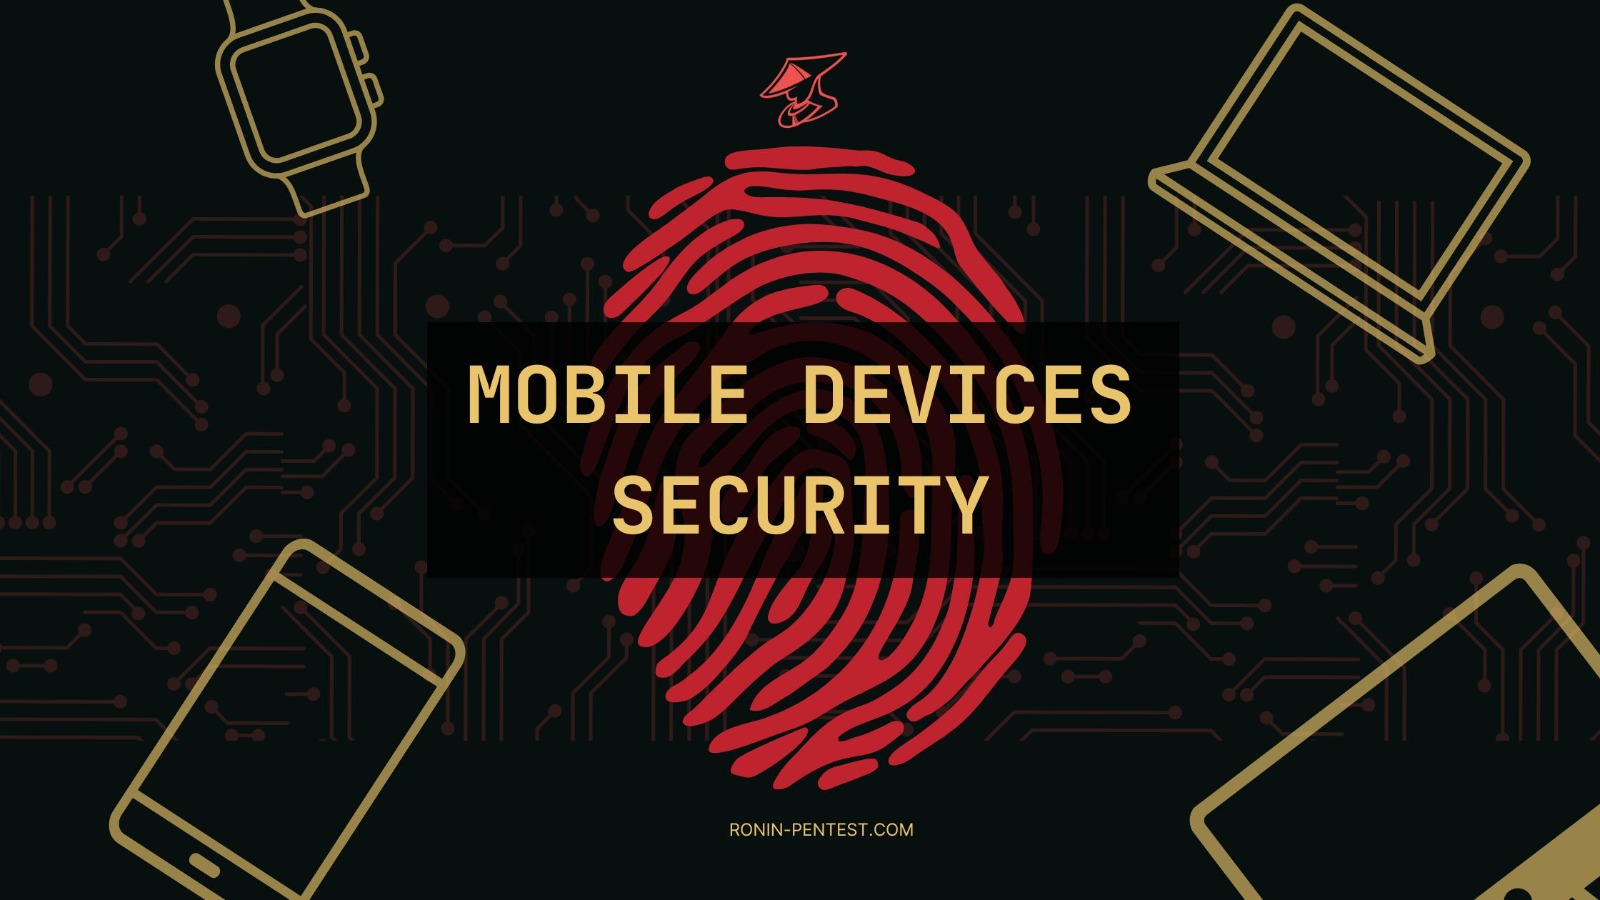 Ronin Pentest | Your Simple Guide to Mobile Devices Security with Ronin Pentest